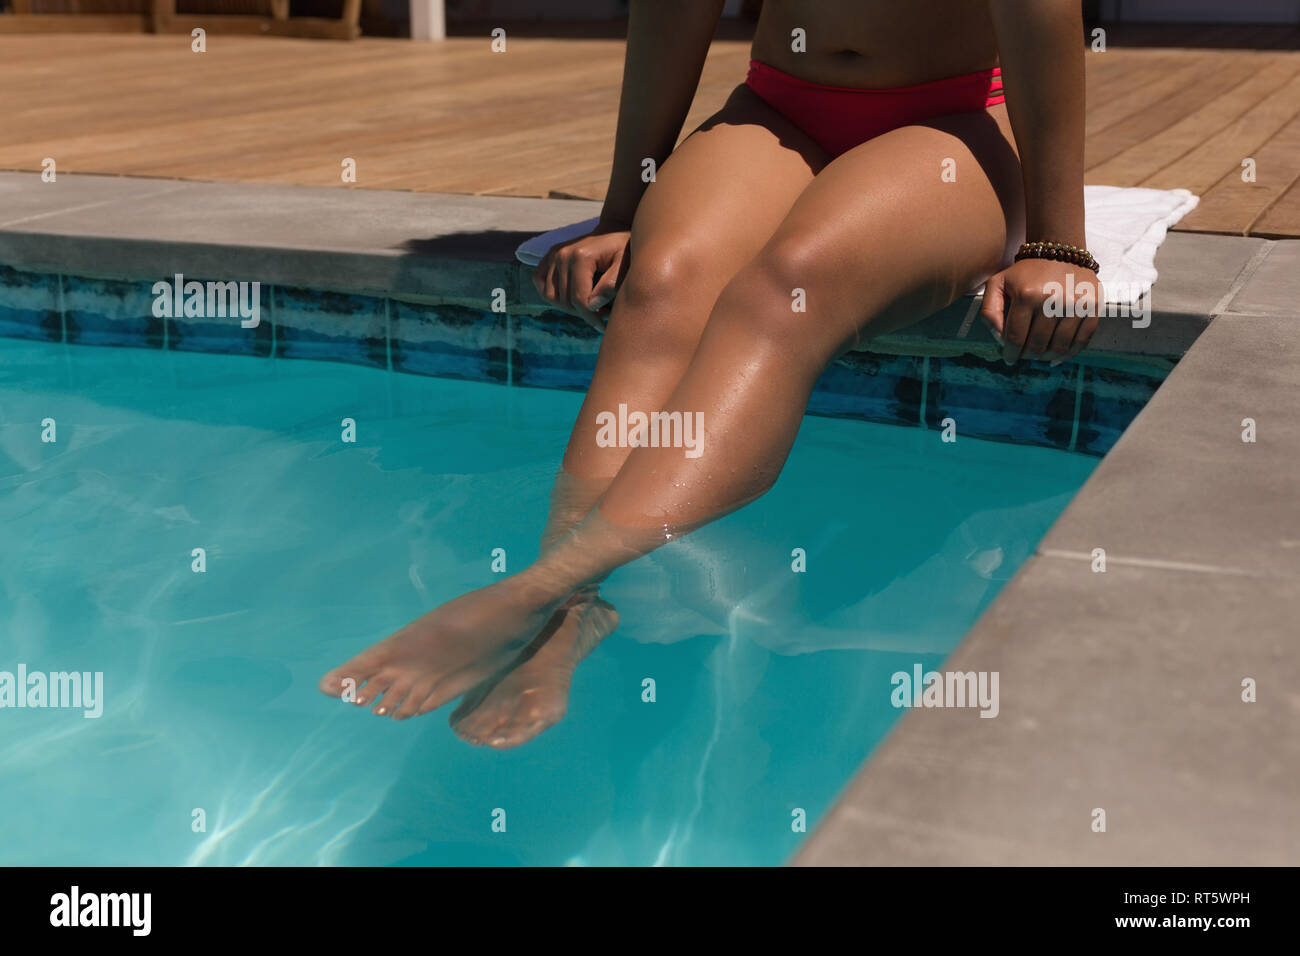 Woman relaxing in a swimming pool on a sunny day Stock Photo